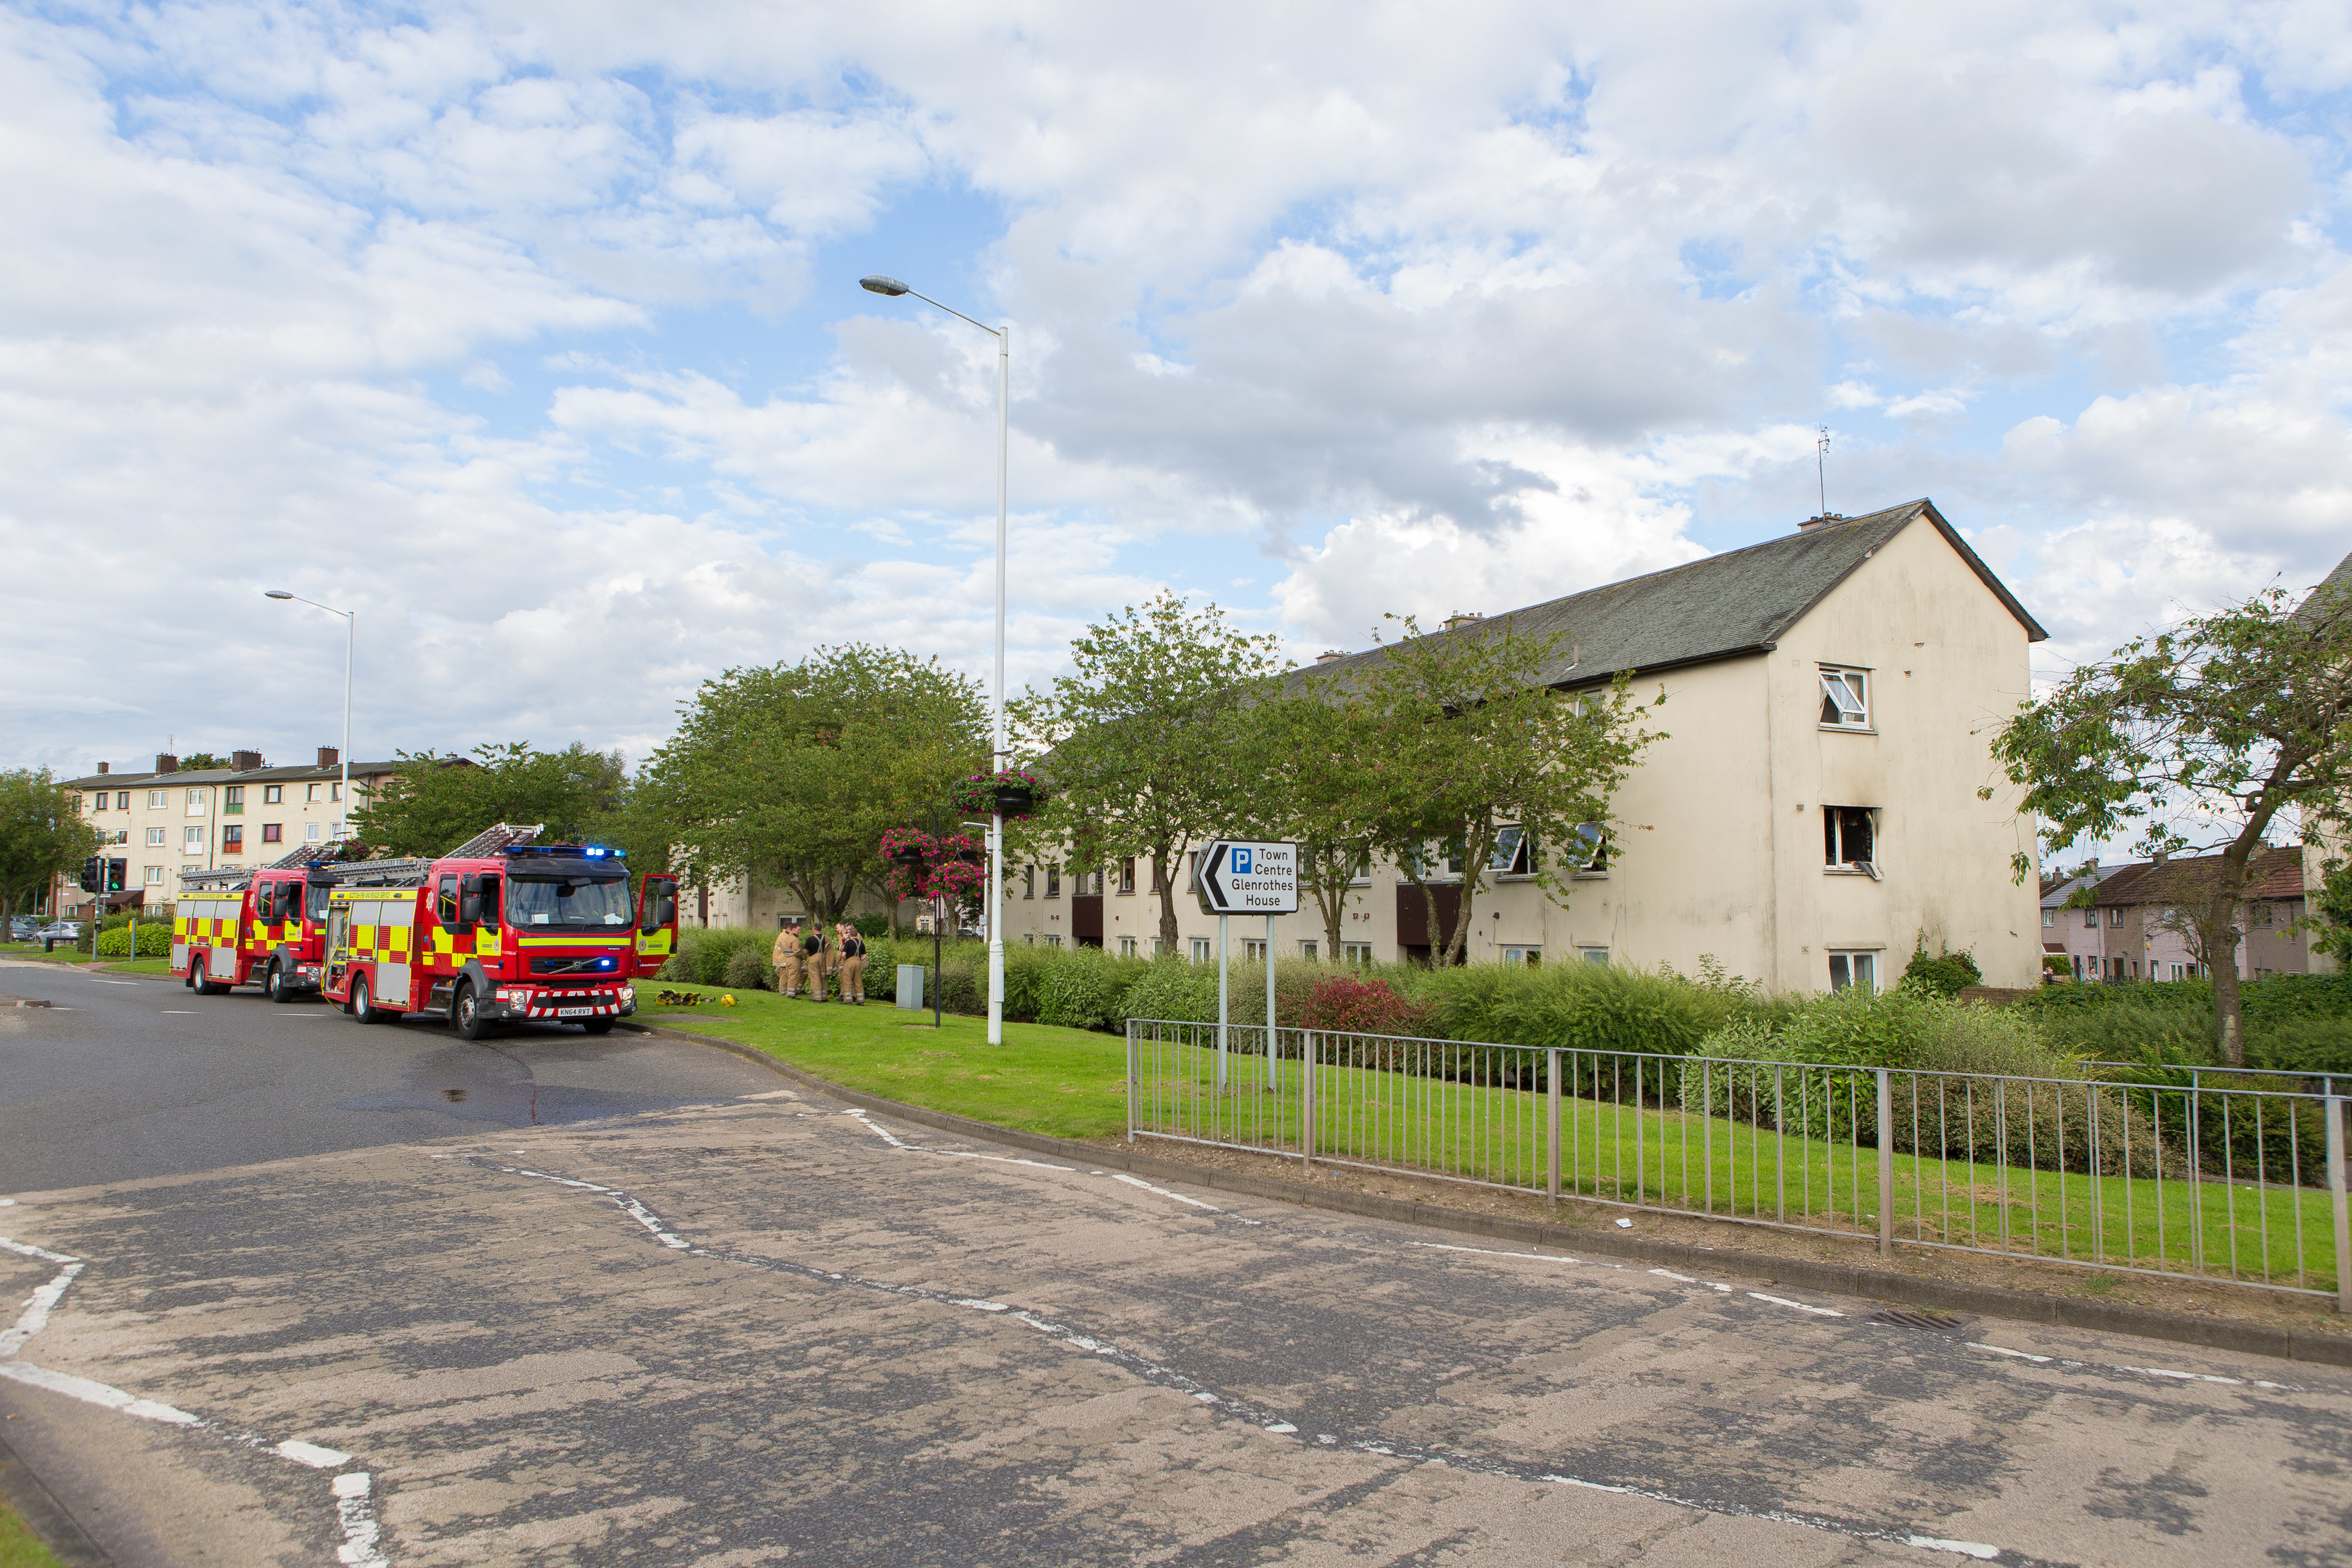 Fire appliances in attendance at Church Street in Glenrothes.